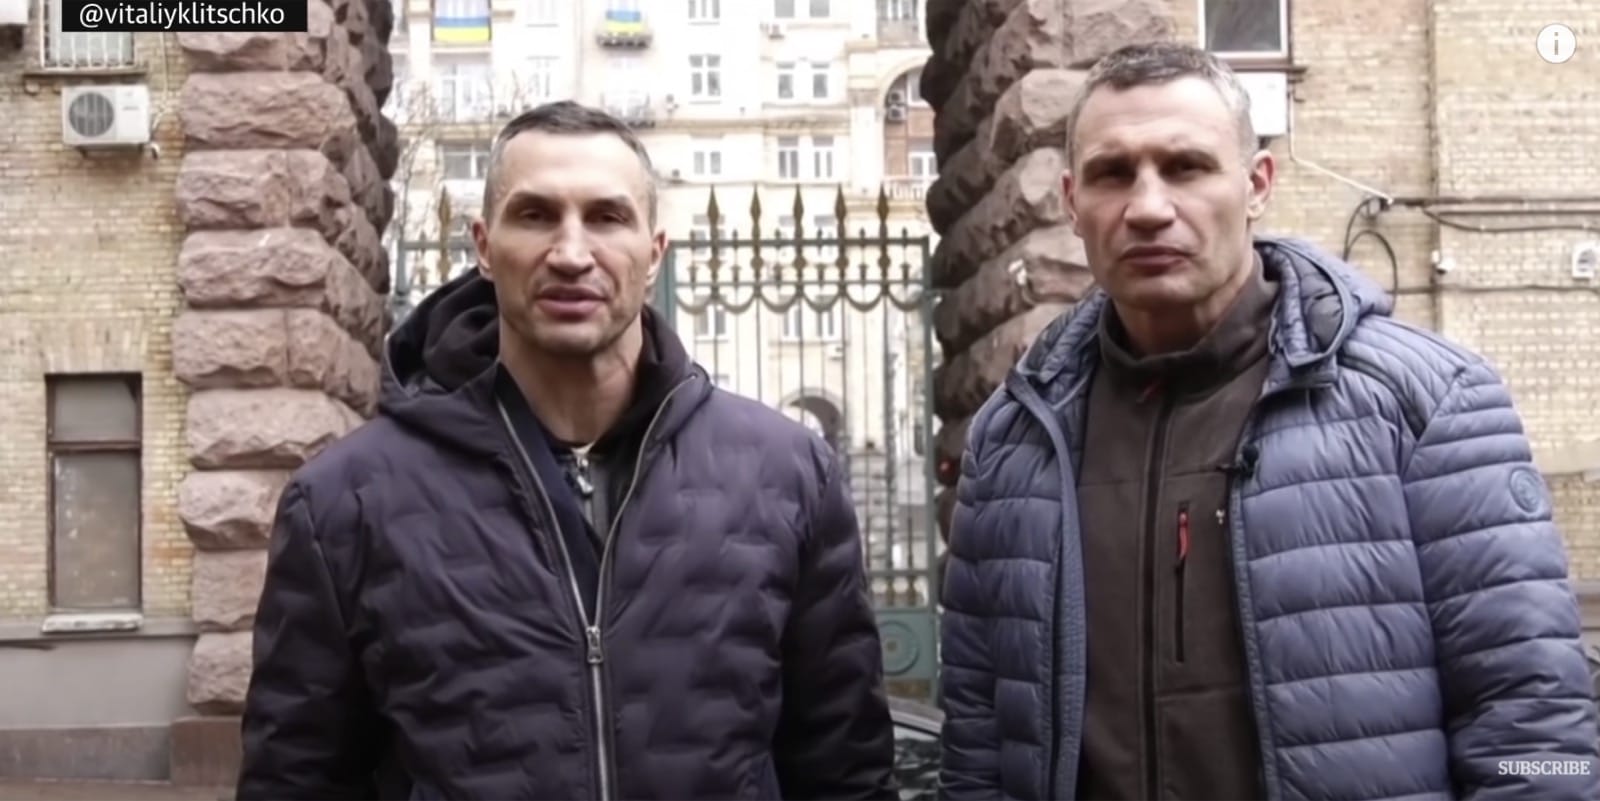 The Klitschko Brothers Are Rightly Receiving Praise For Their Bravery During Russia-Ukraine Tensions